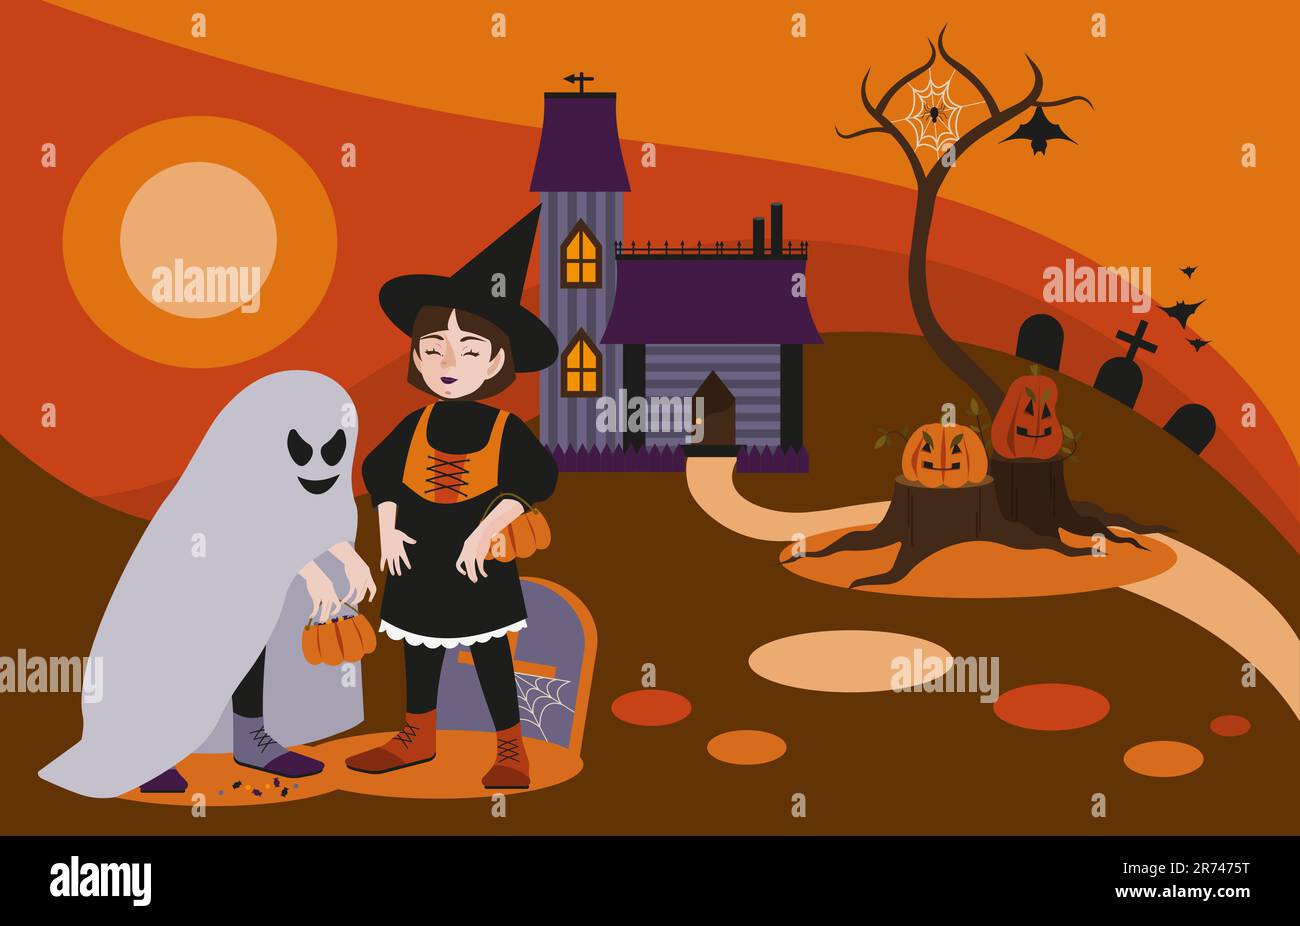 Halloween holiday scene with multiple characters. Young witch, kid ghost, house, pumpkins on stumps, tree without leaves and with a spider on a web, c Stock Vector